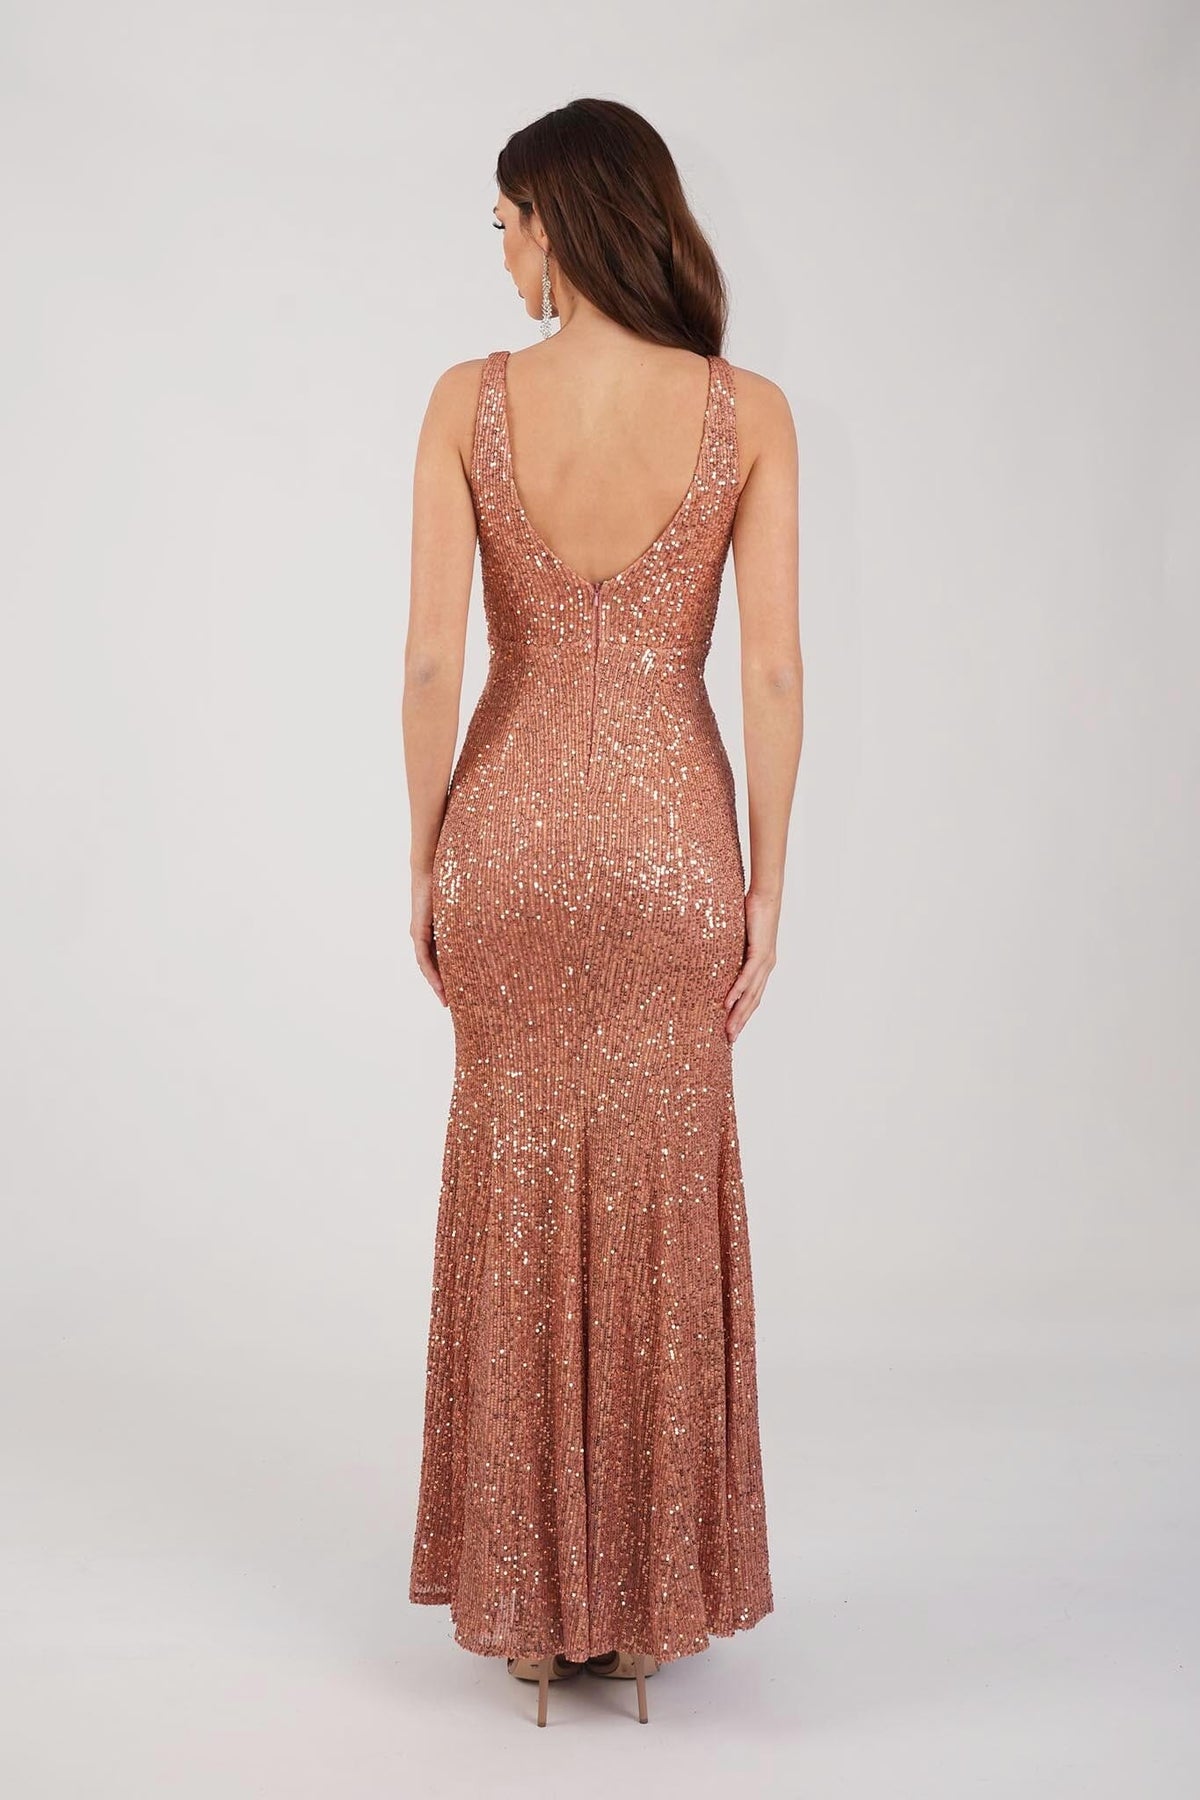 V Open Back Design of Dusty Pink Fitted Sequin Evening Gown with Deep V Neckline